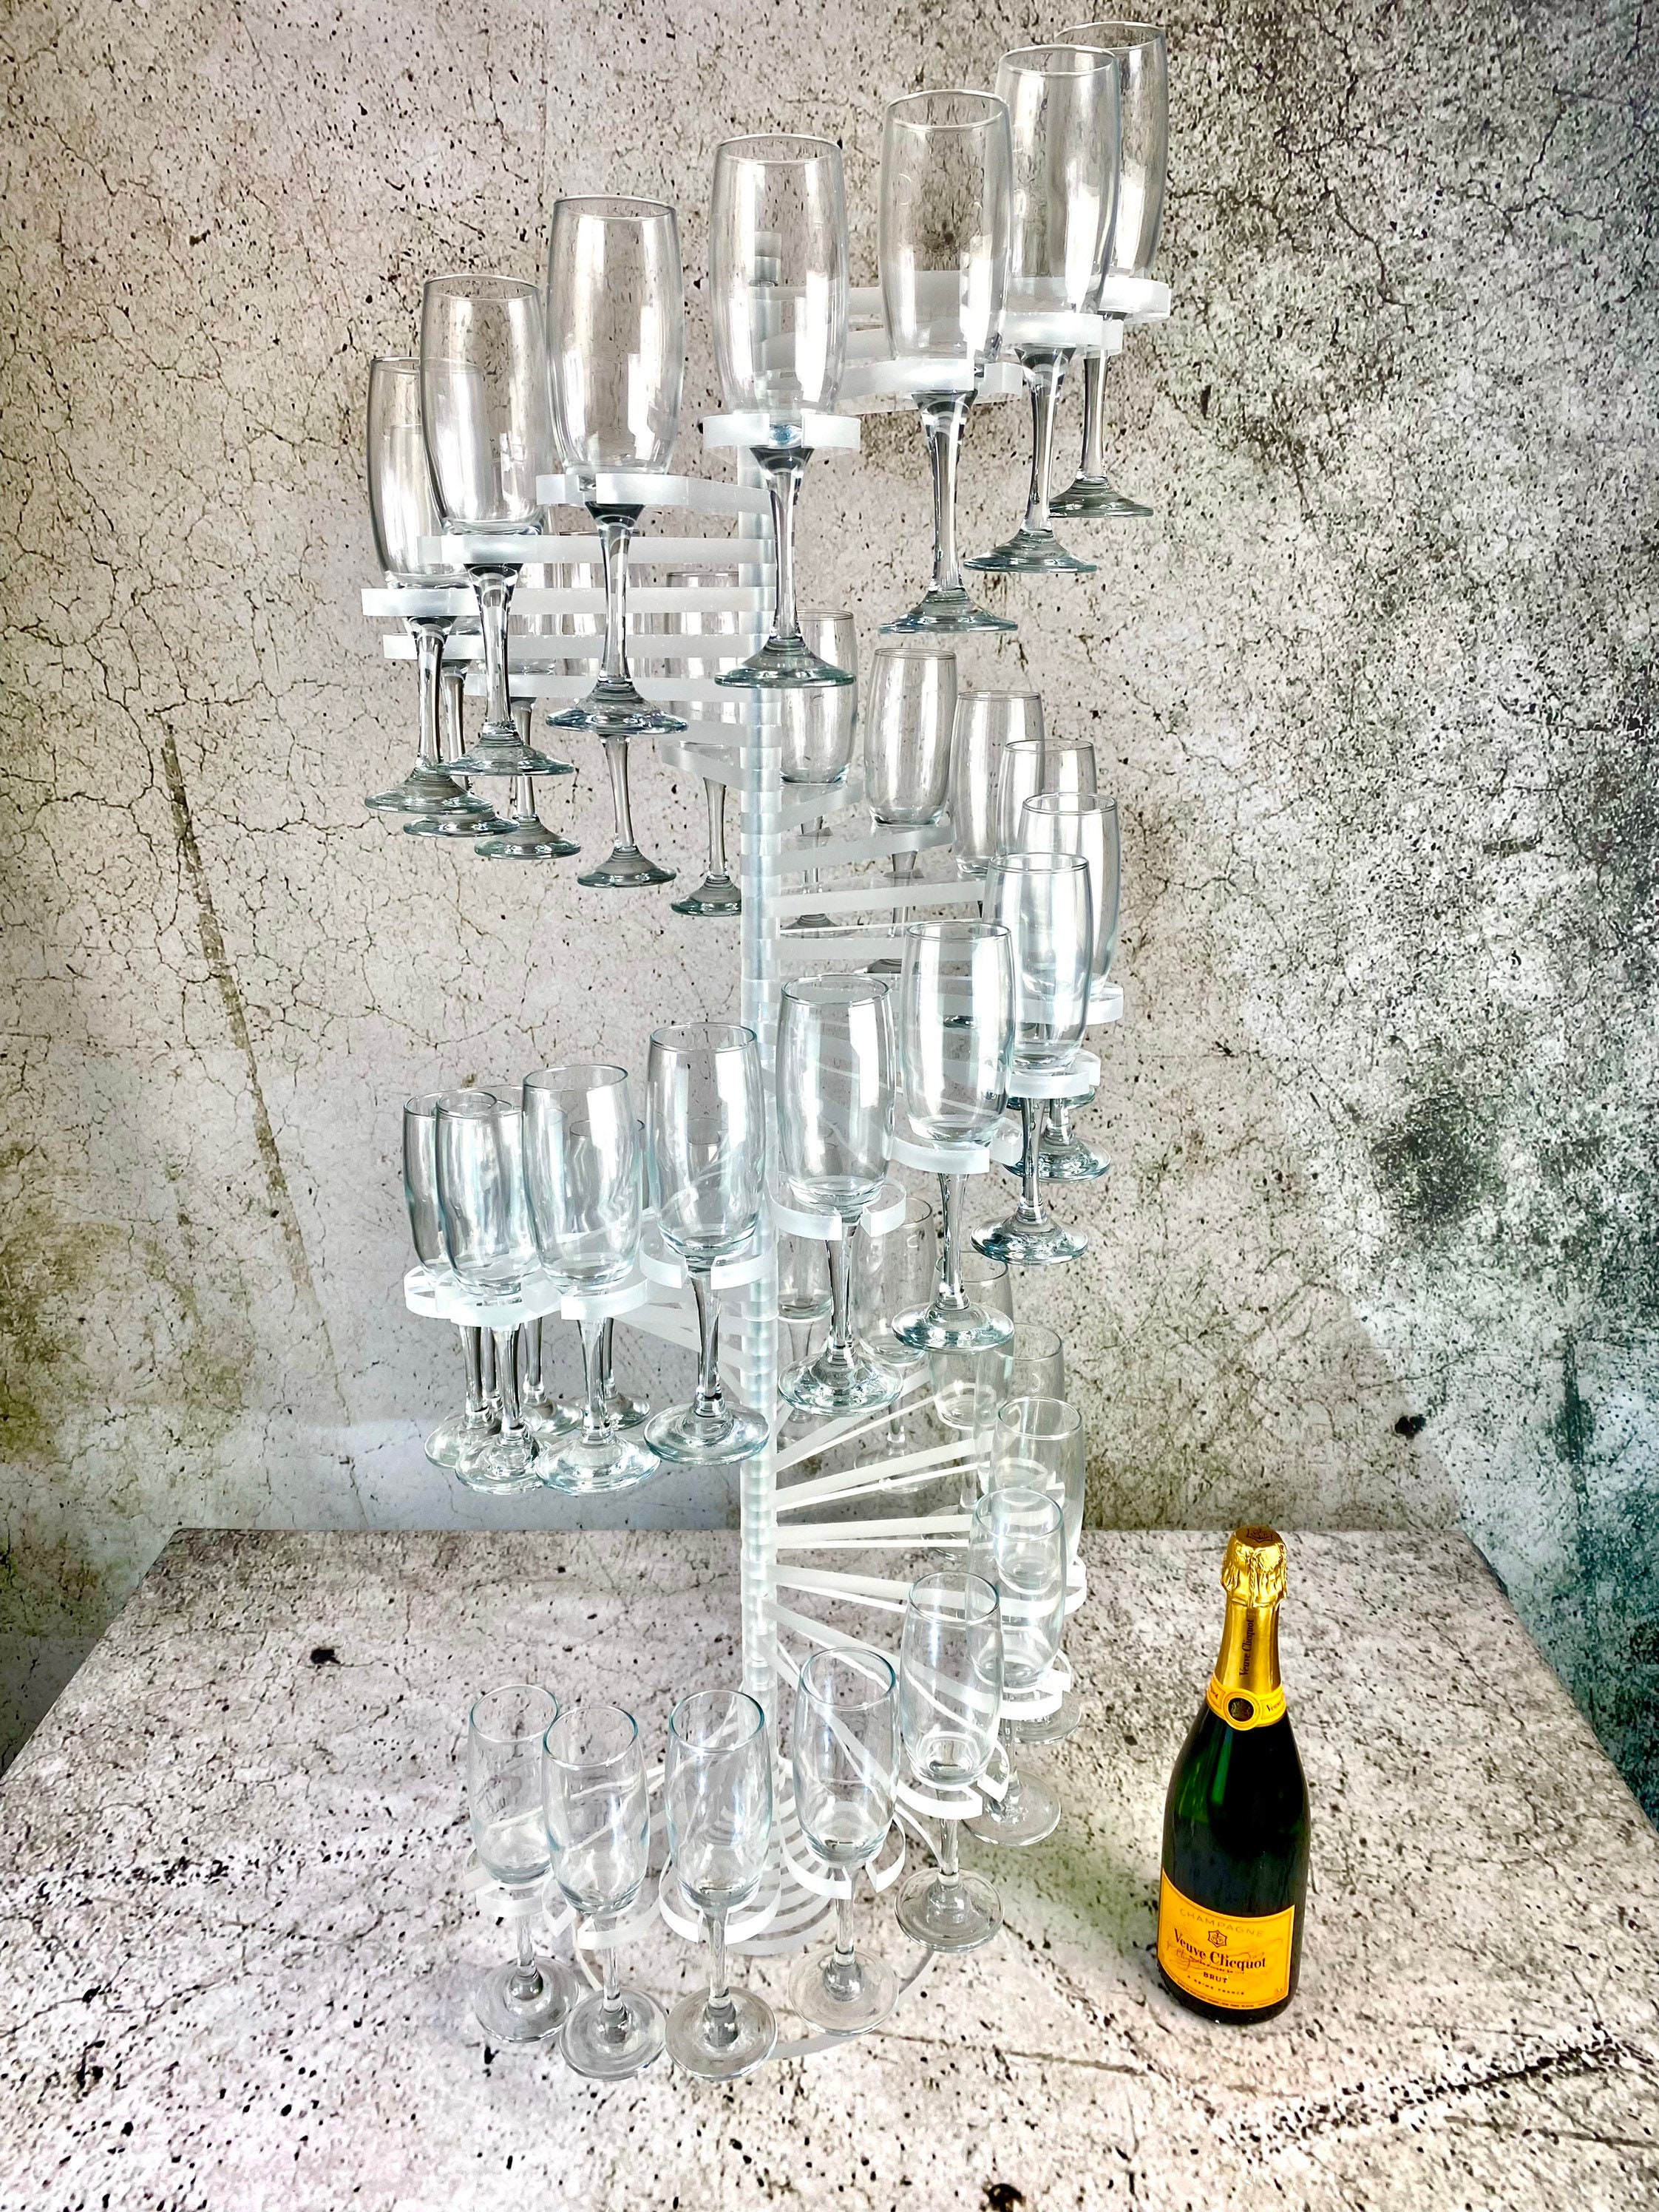 Display Rack Acrylic Prosecco Champagne Glass Wall Holder for